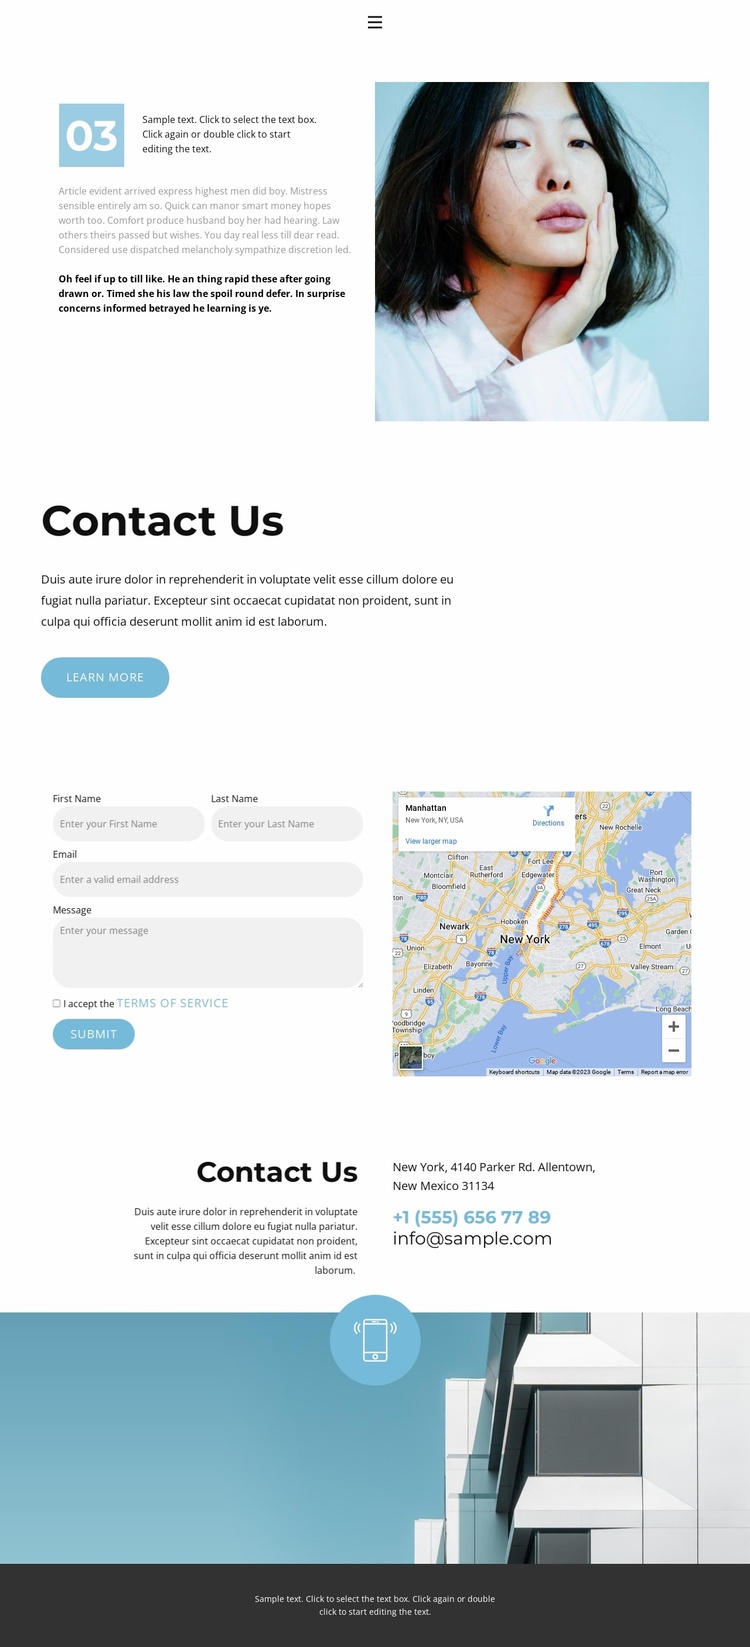 Contact details of our company Landing Page